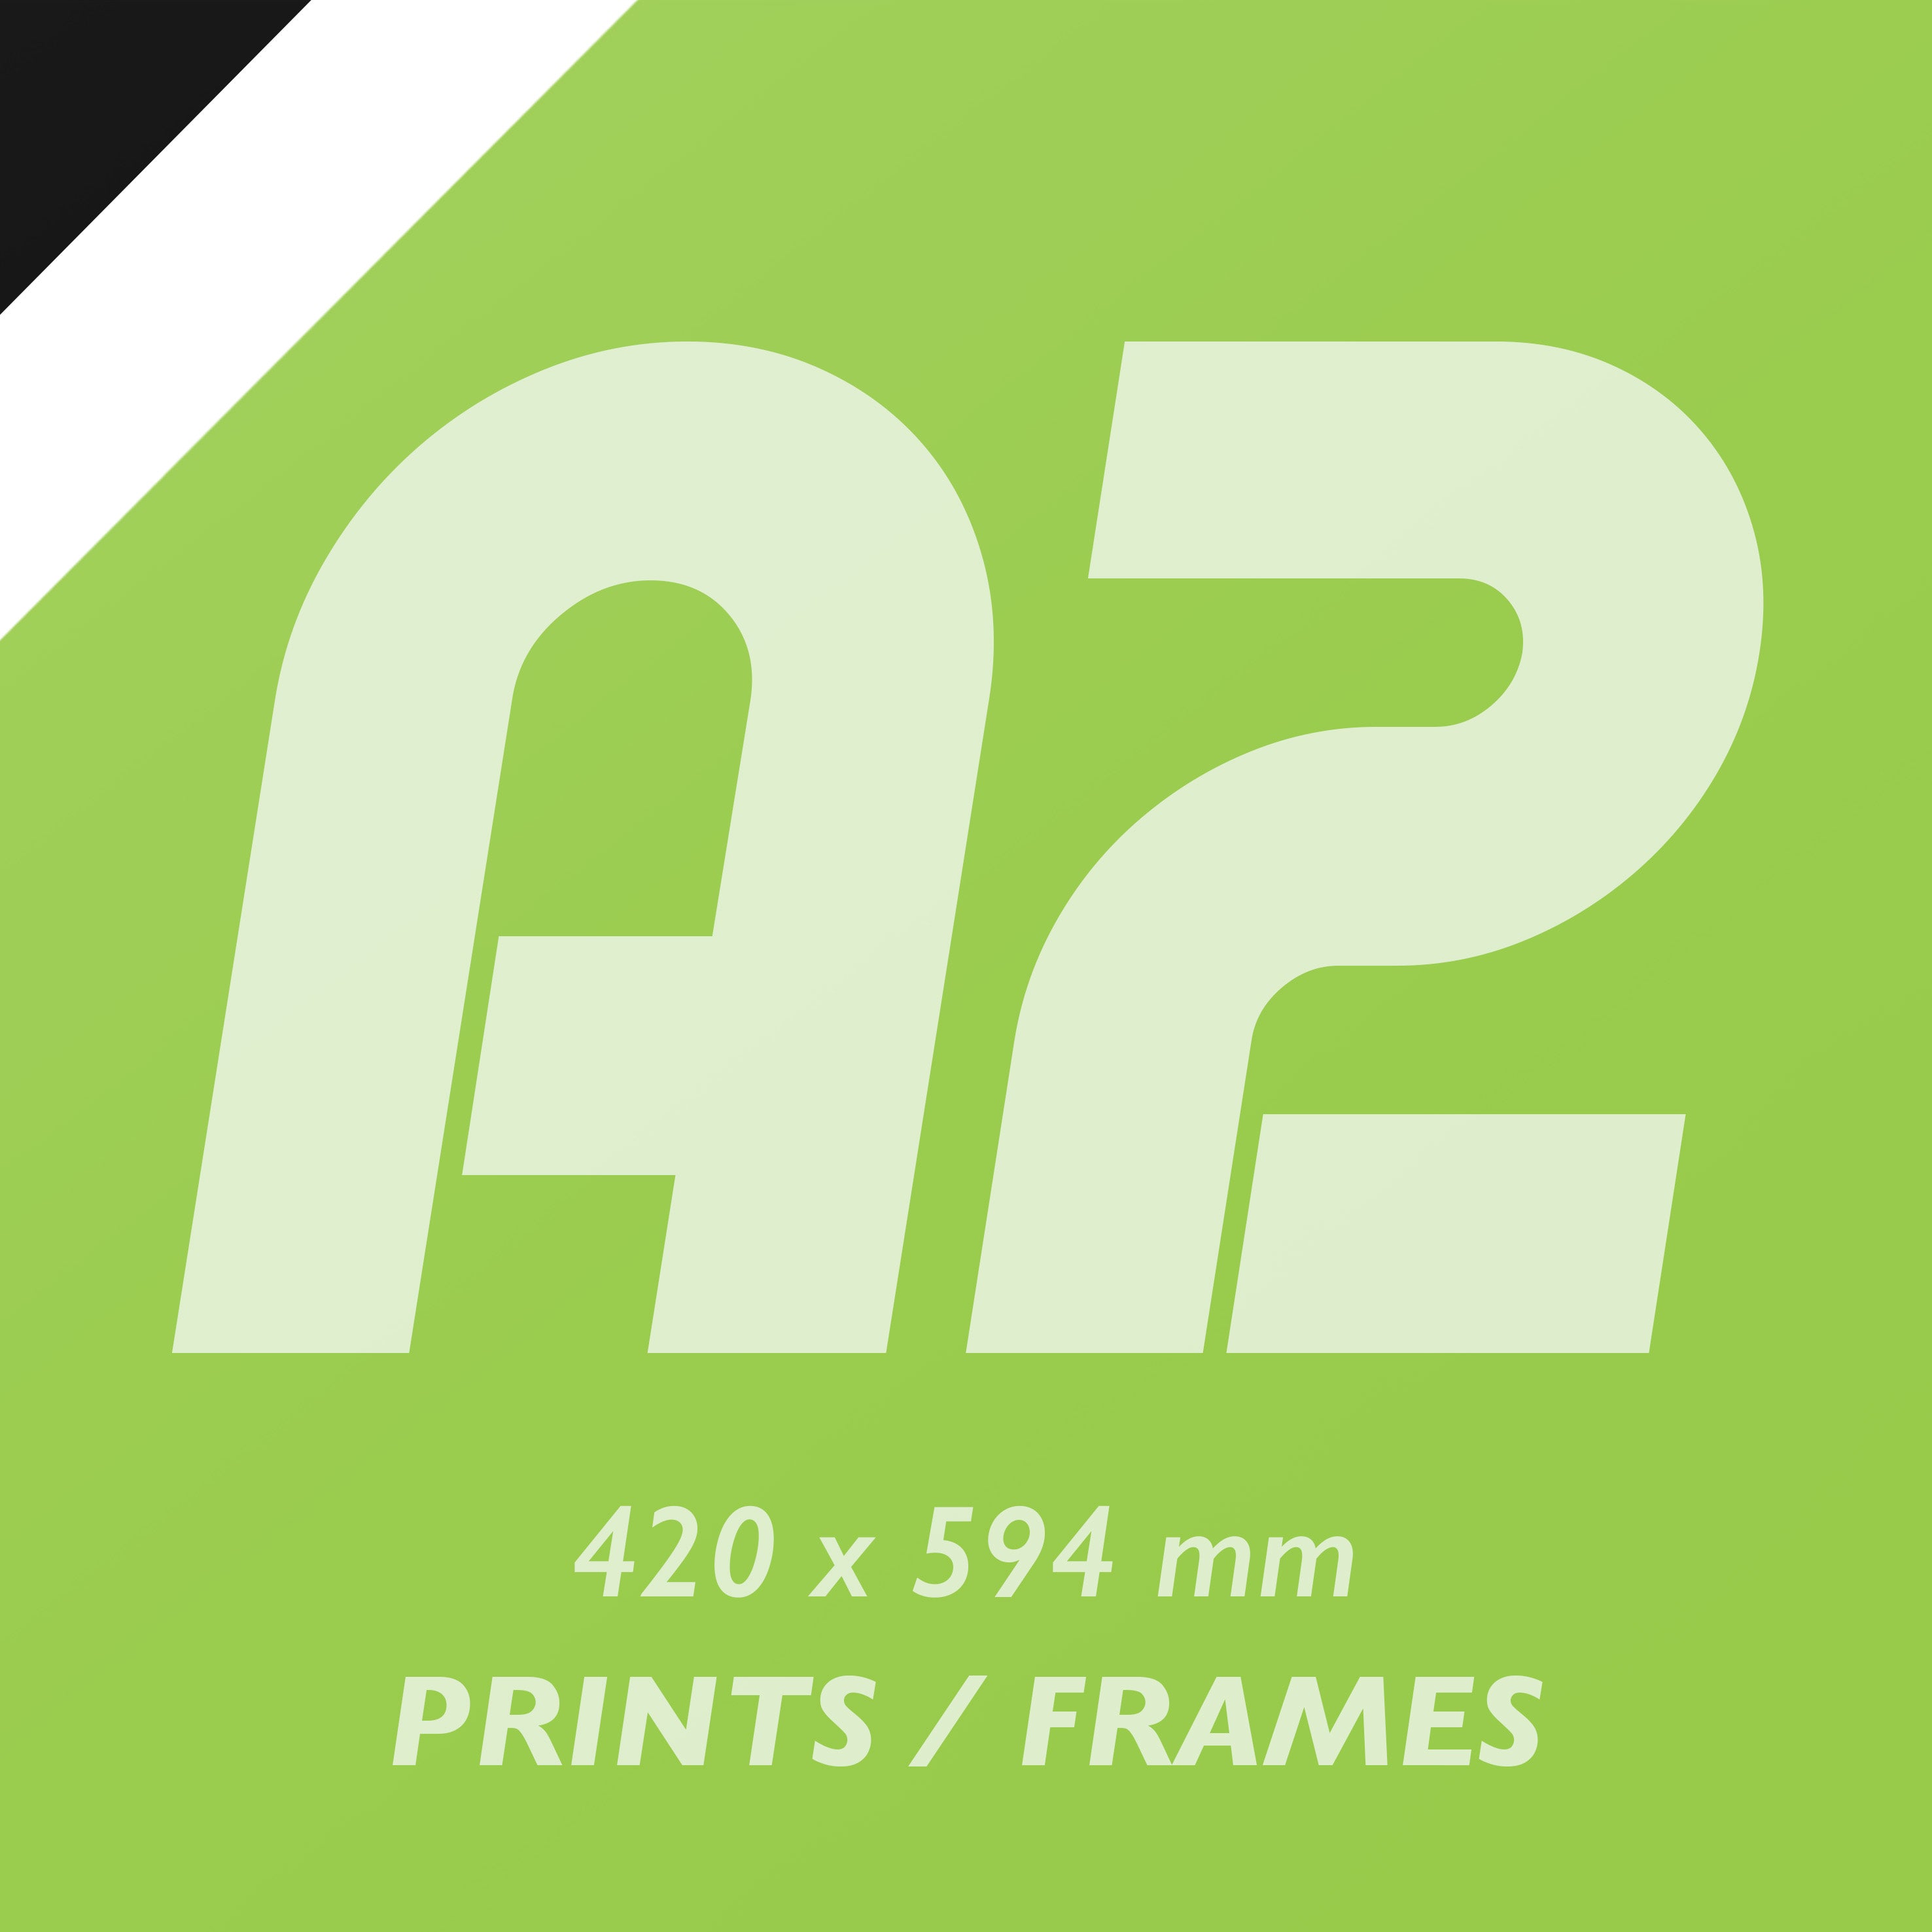 A4, A3, A2, A1 picture framing, high quality photo print & frame